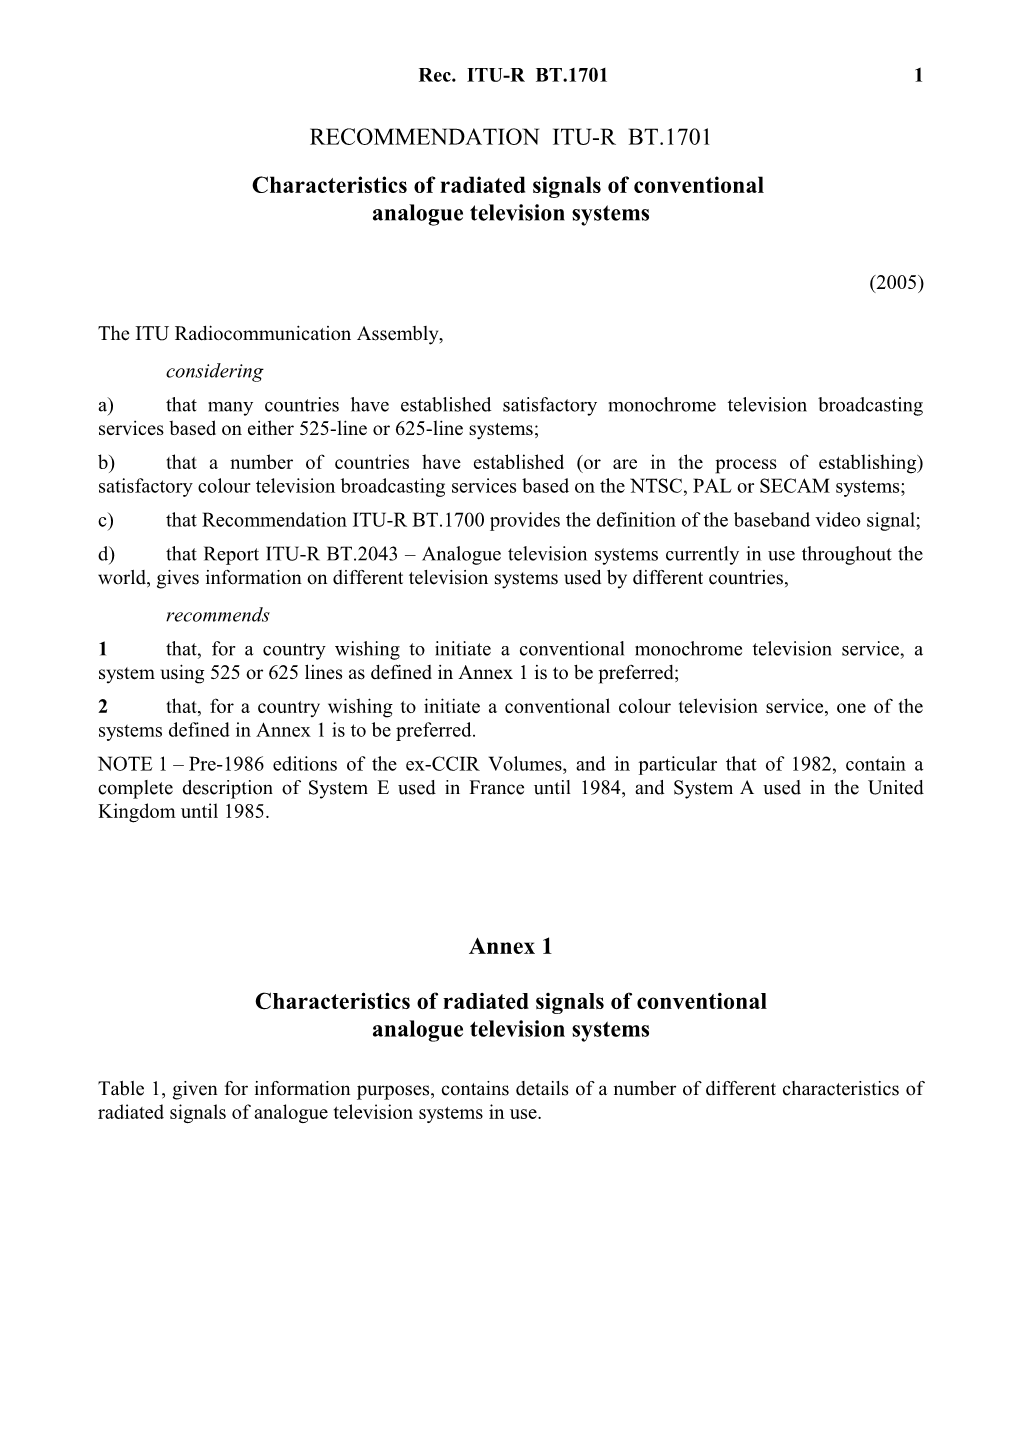 DRAFT NEW RECOMMENDATION ITU-R BT.1701 - Characteristics of Radiated Signals of Conventional